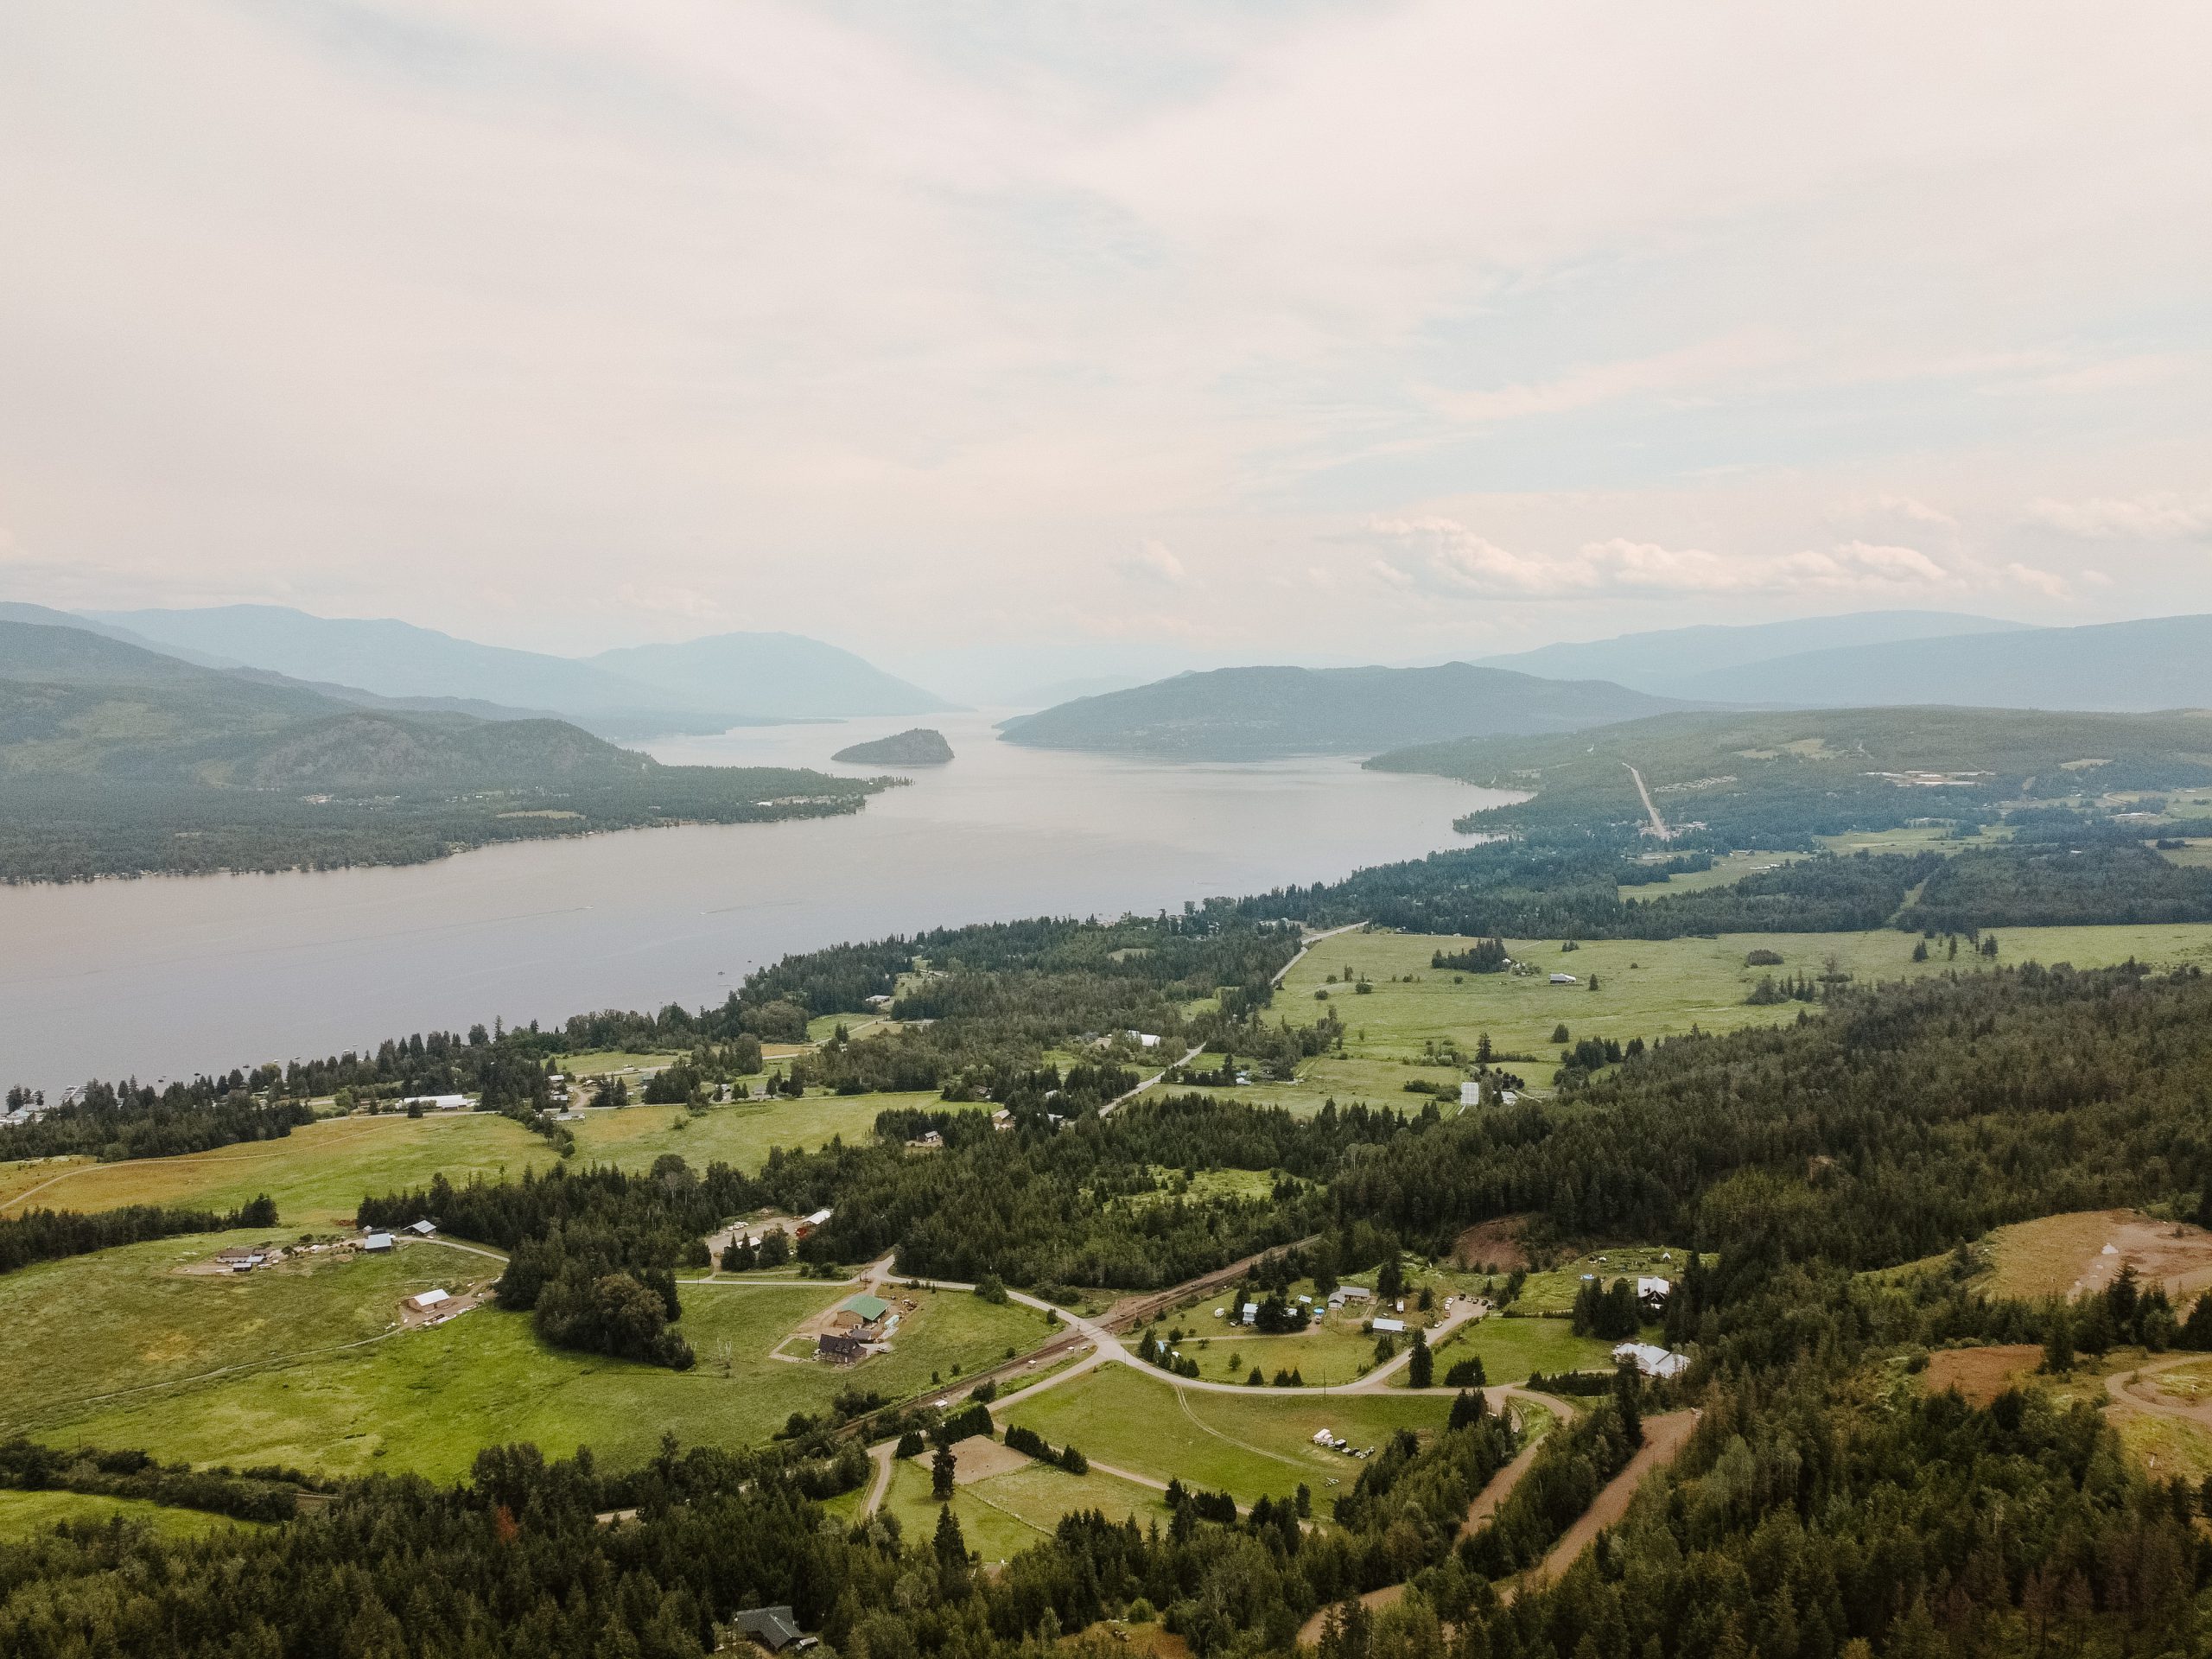  Curated activities for you in the Shuswap